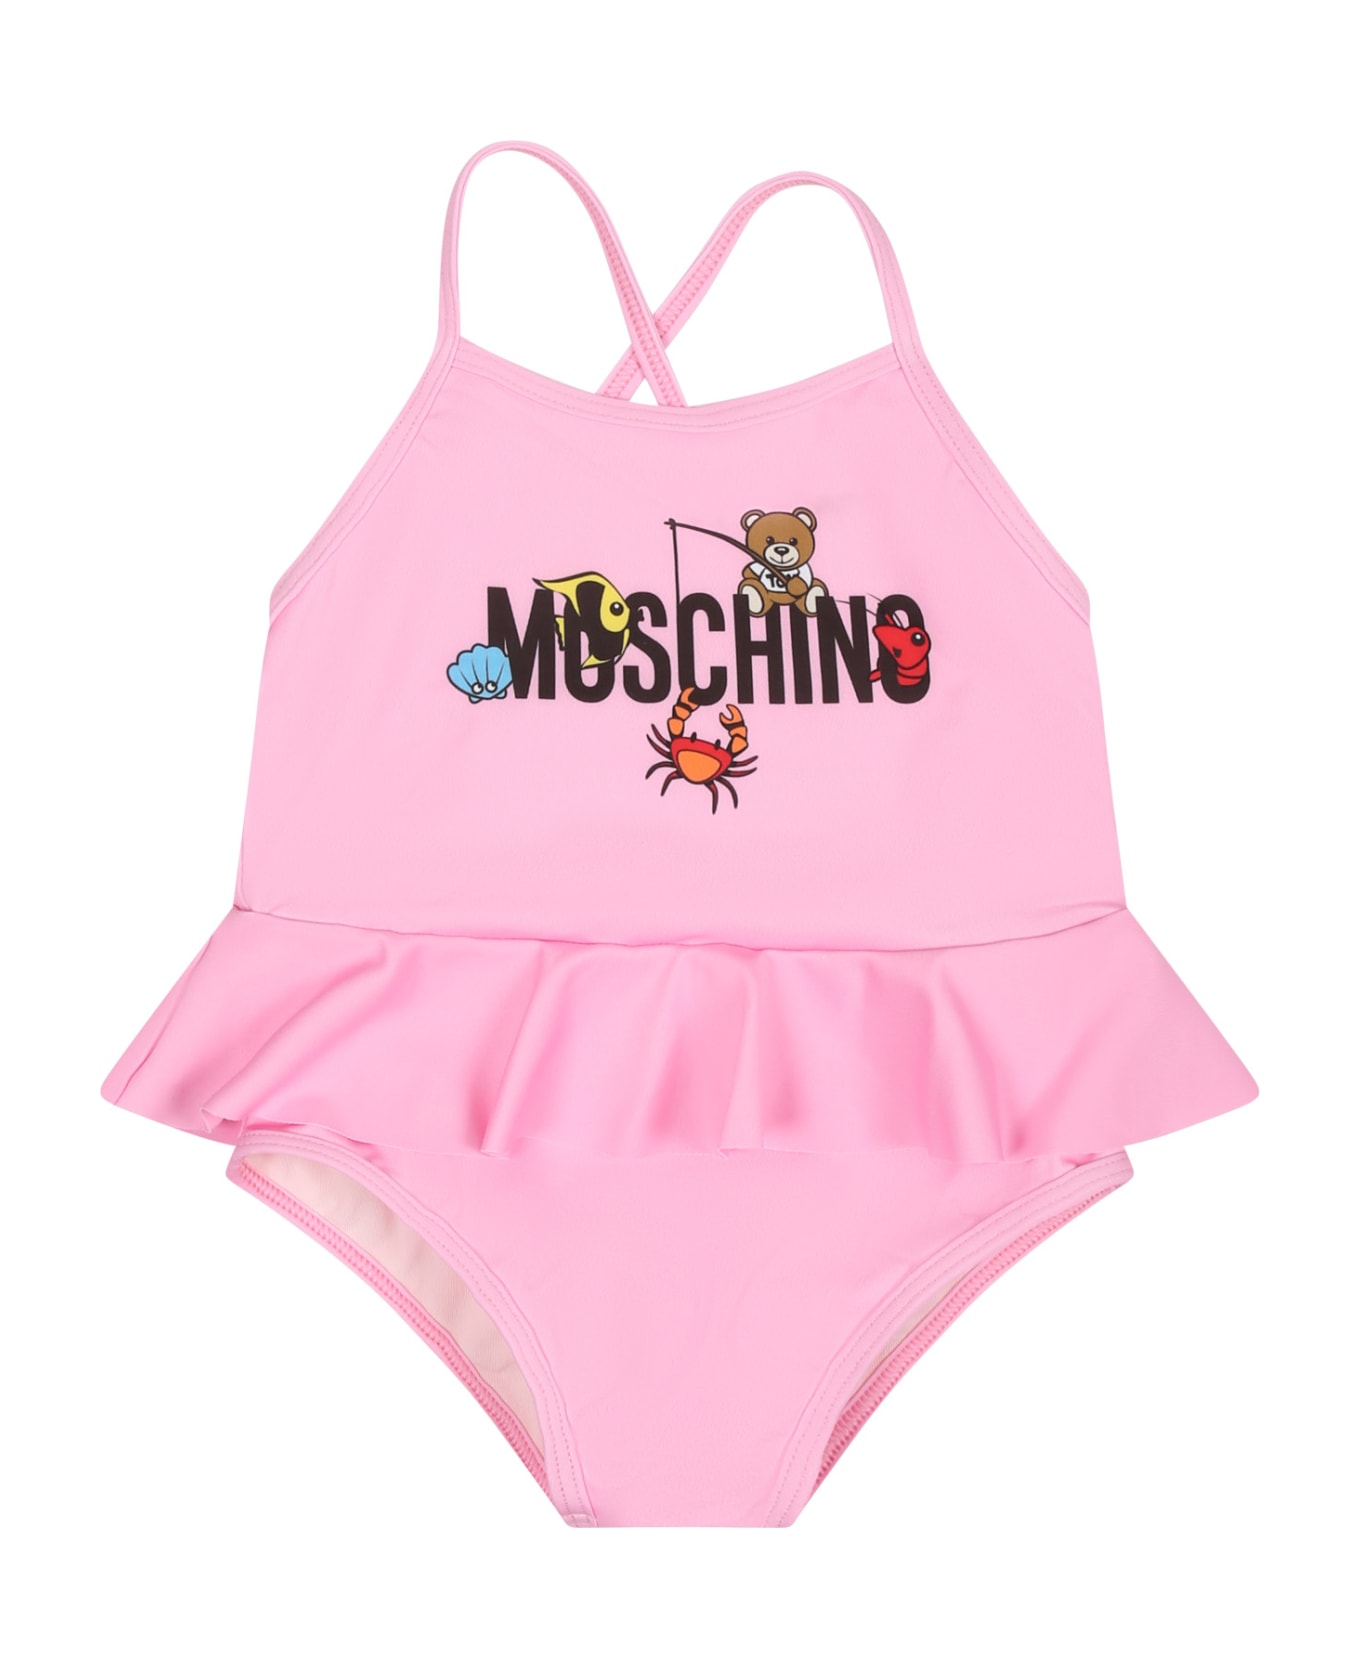 Moschino Pink One Piece Swimsuit For Baby Girl With Logo - Pink 水着